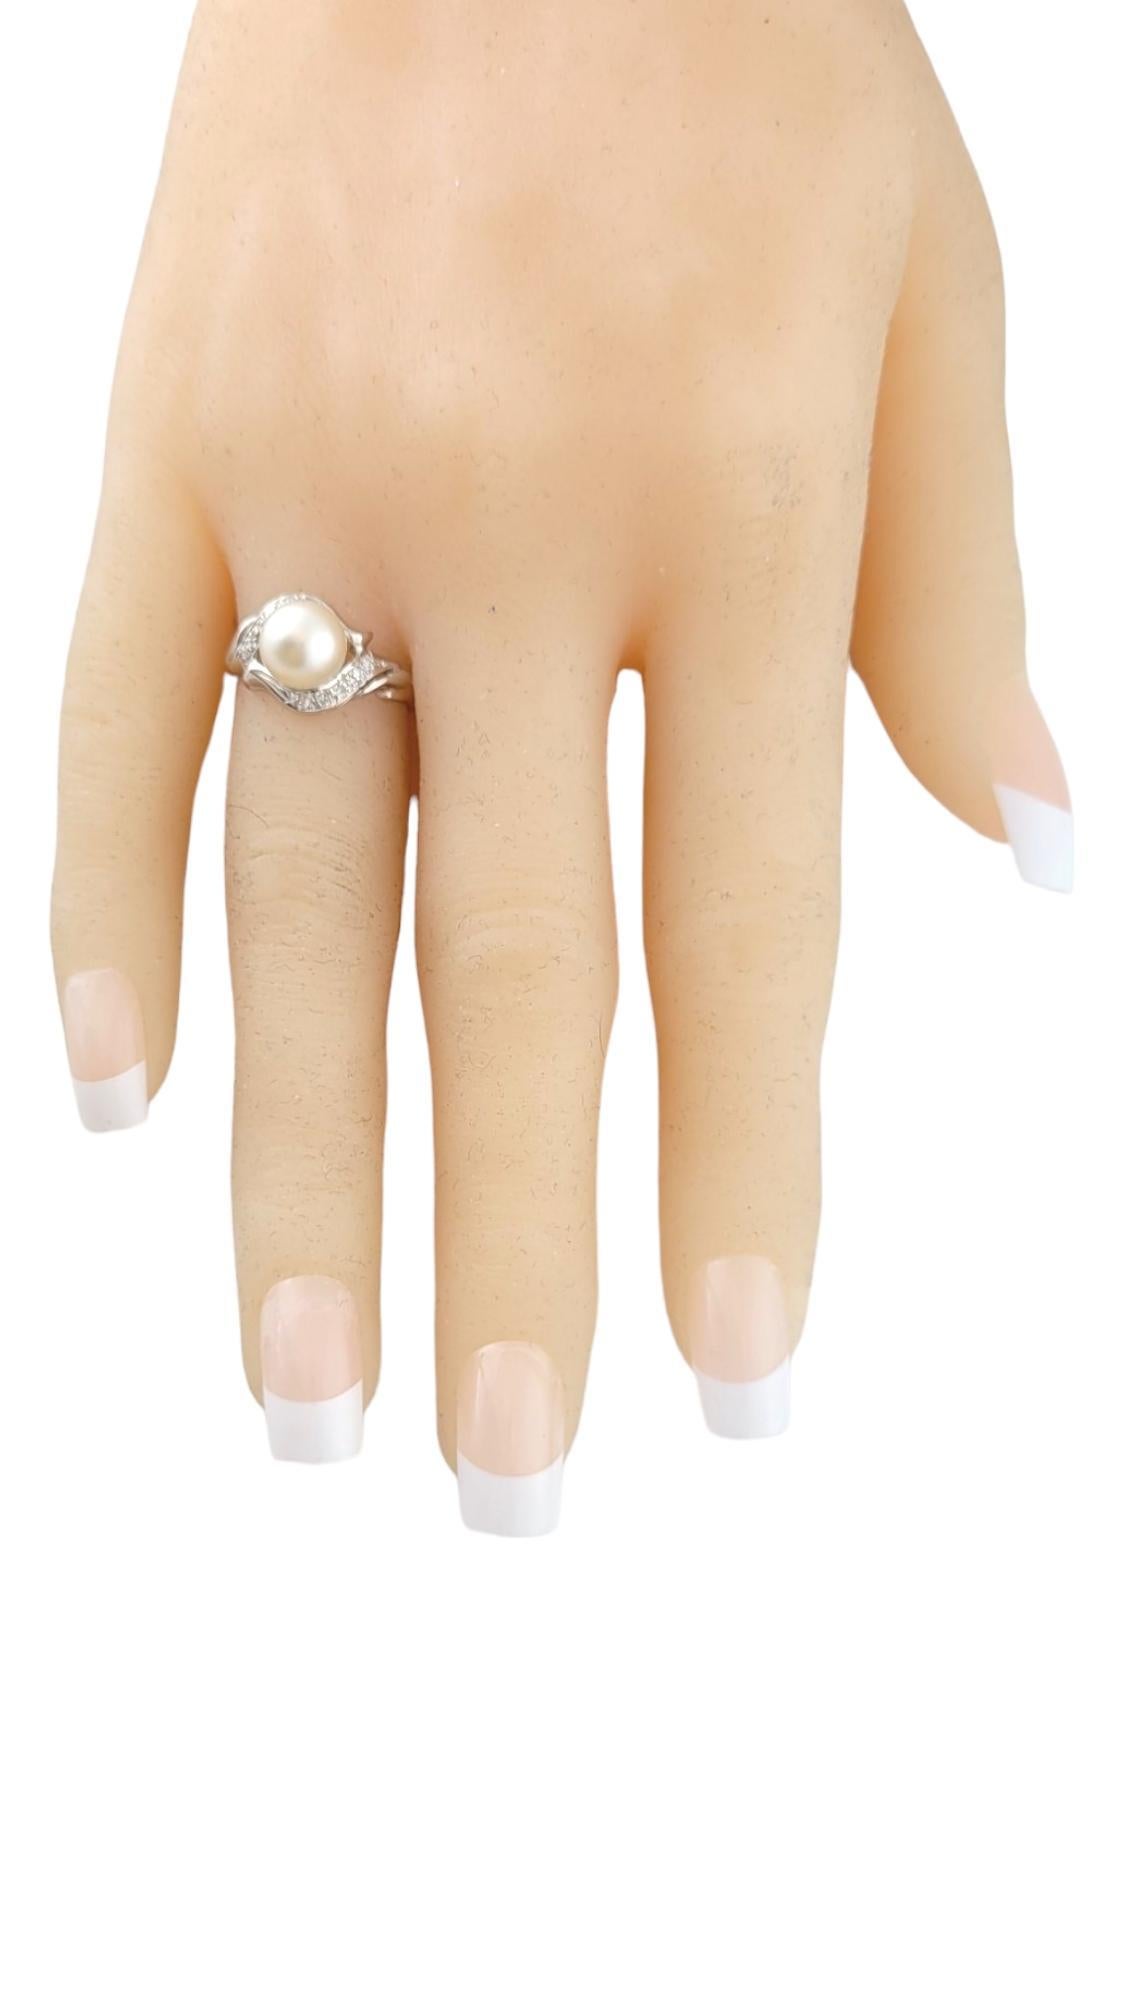 14K White Gold Diamond and Pearl Ring Size 5.25 #16424 For Sale 1